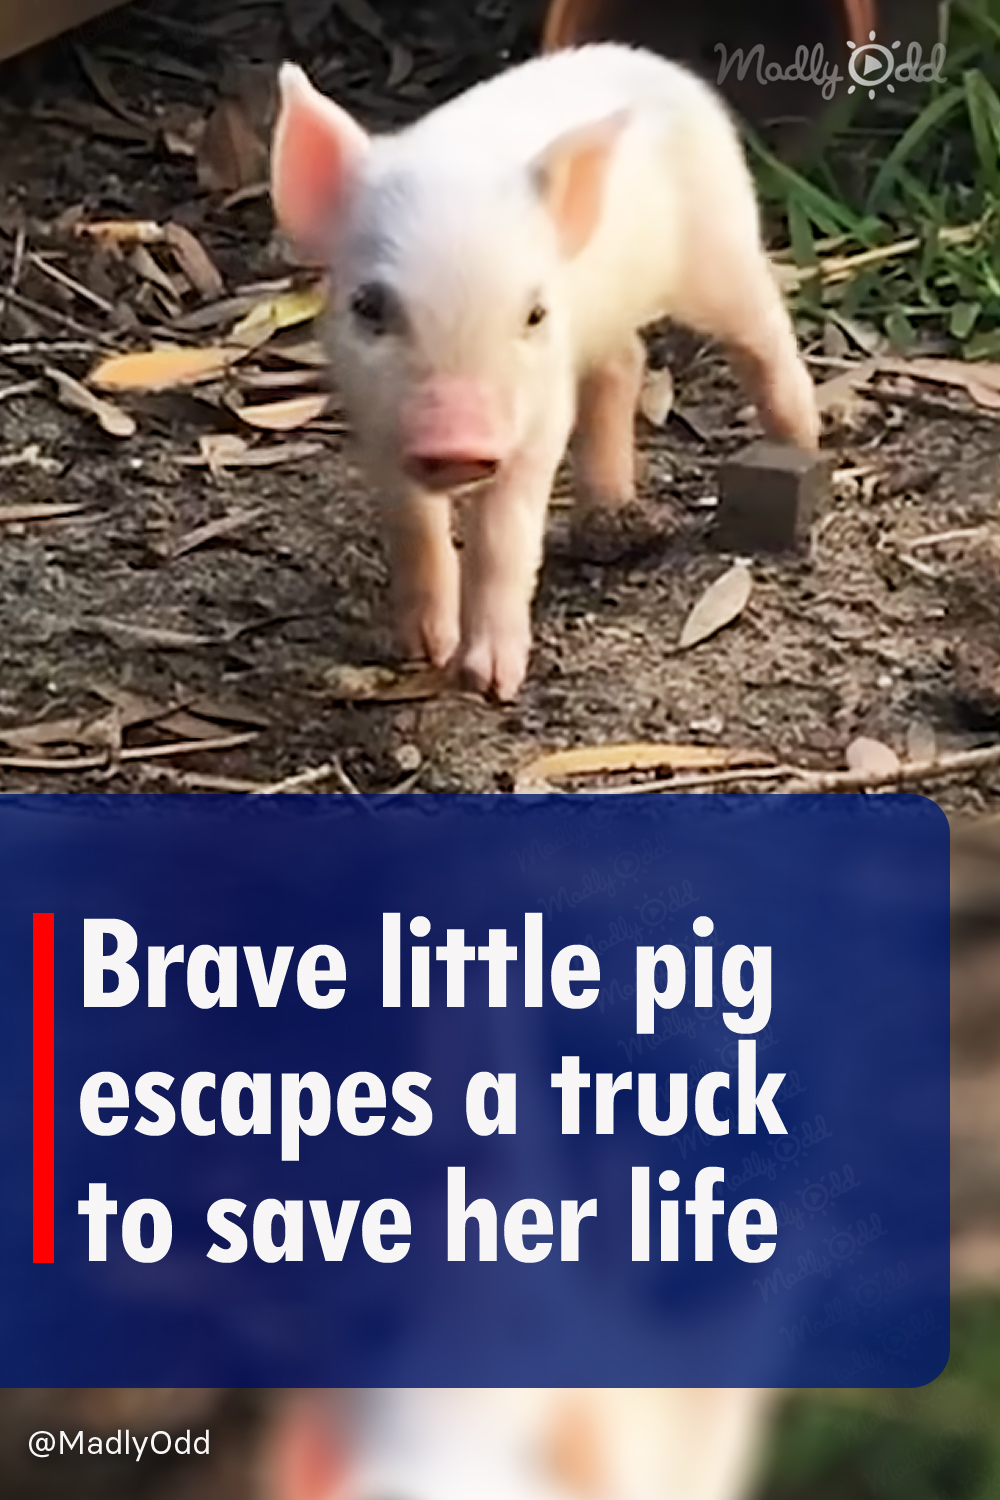 Brave little pig escapes a truck to save her life